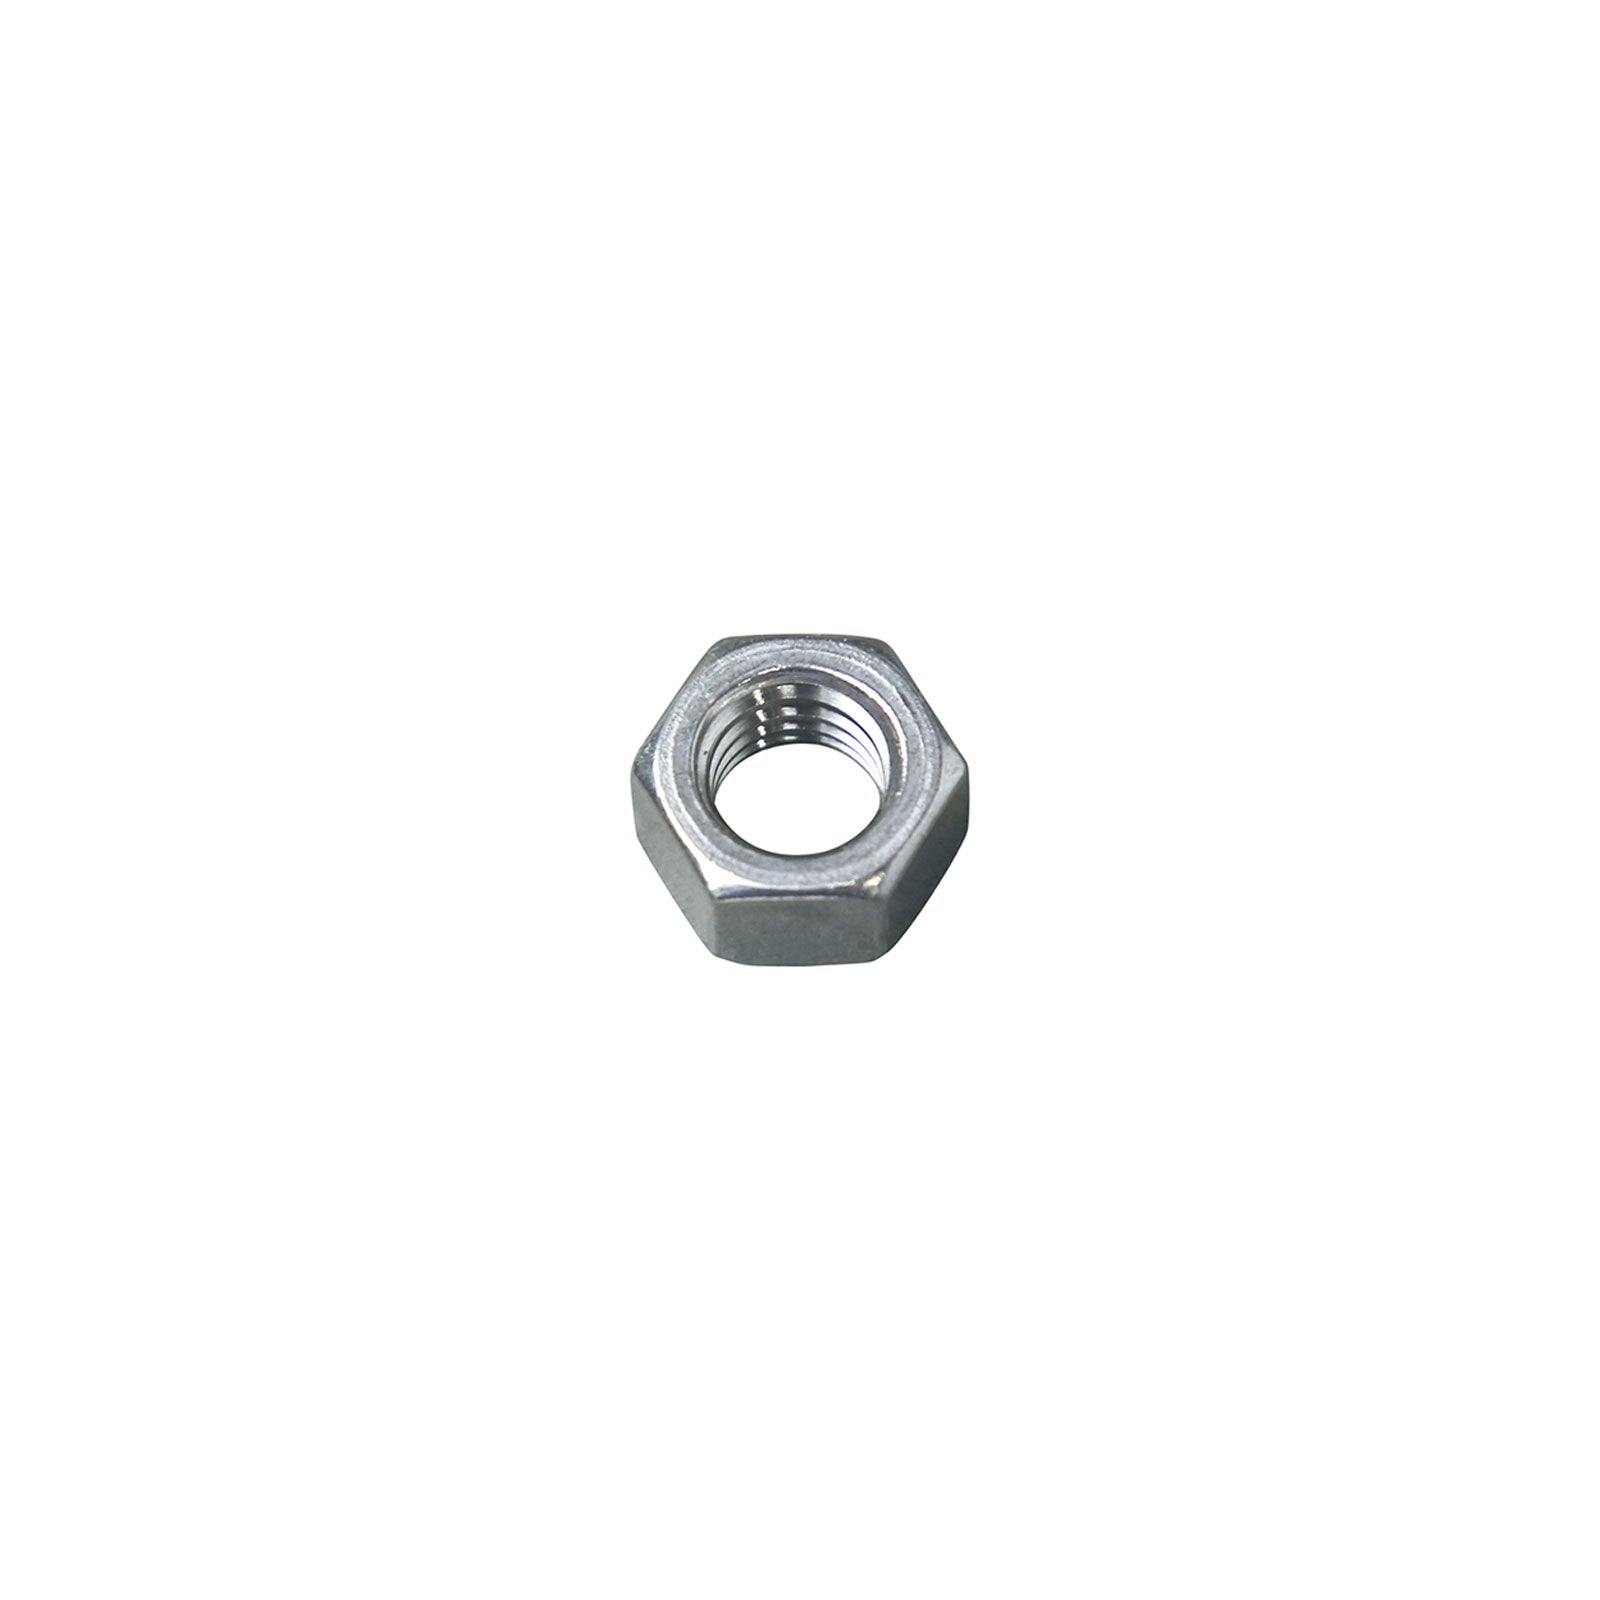 3/8"-16 Conquest Hex Nut - 304 Stainless Steel